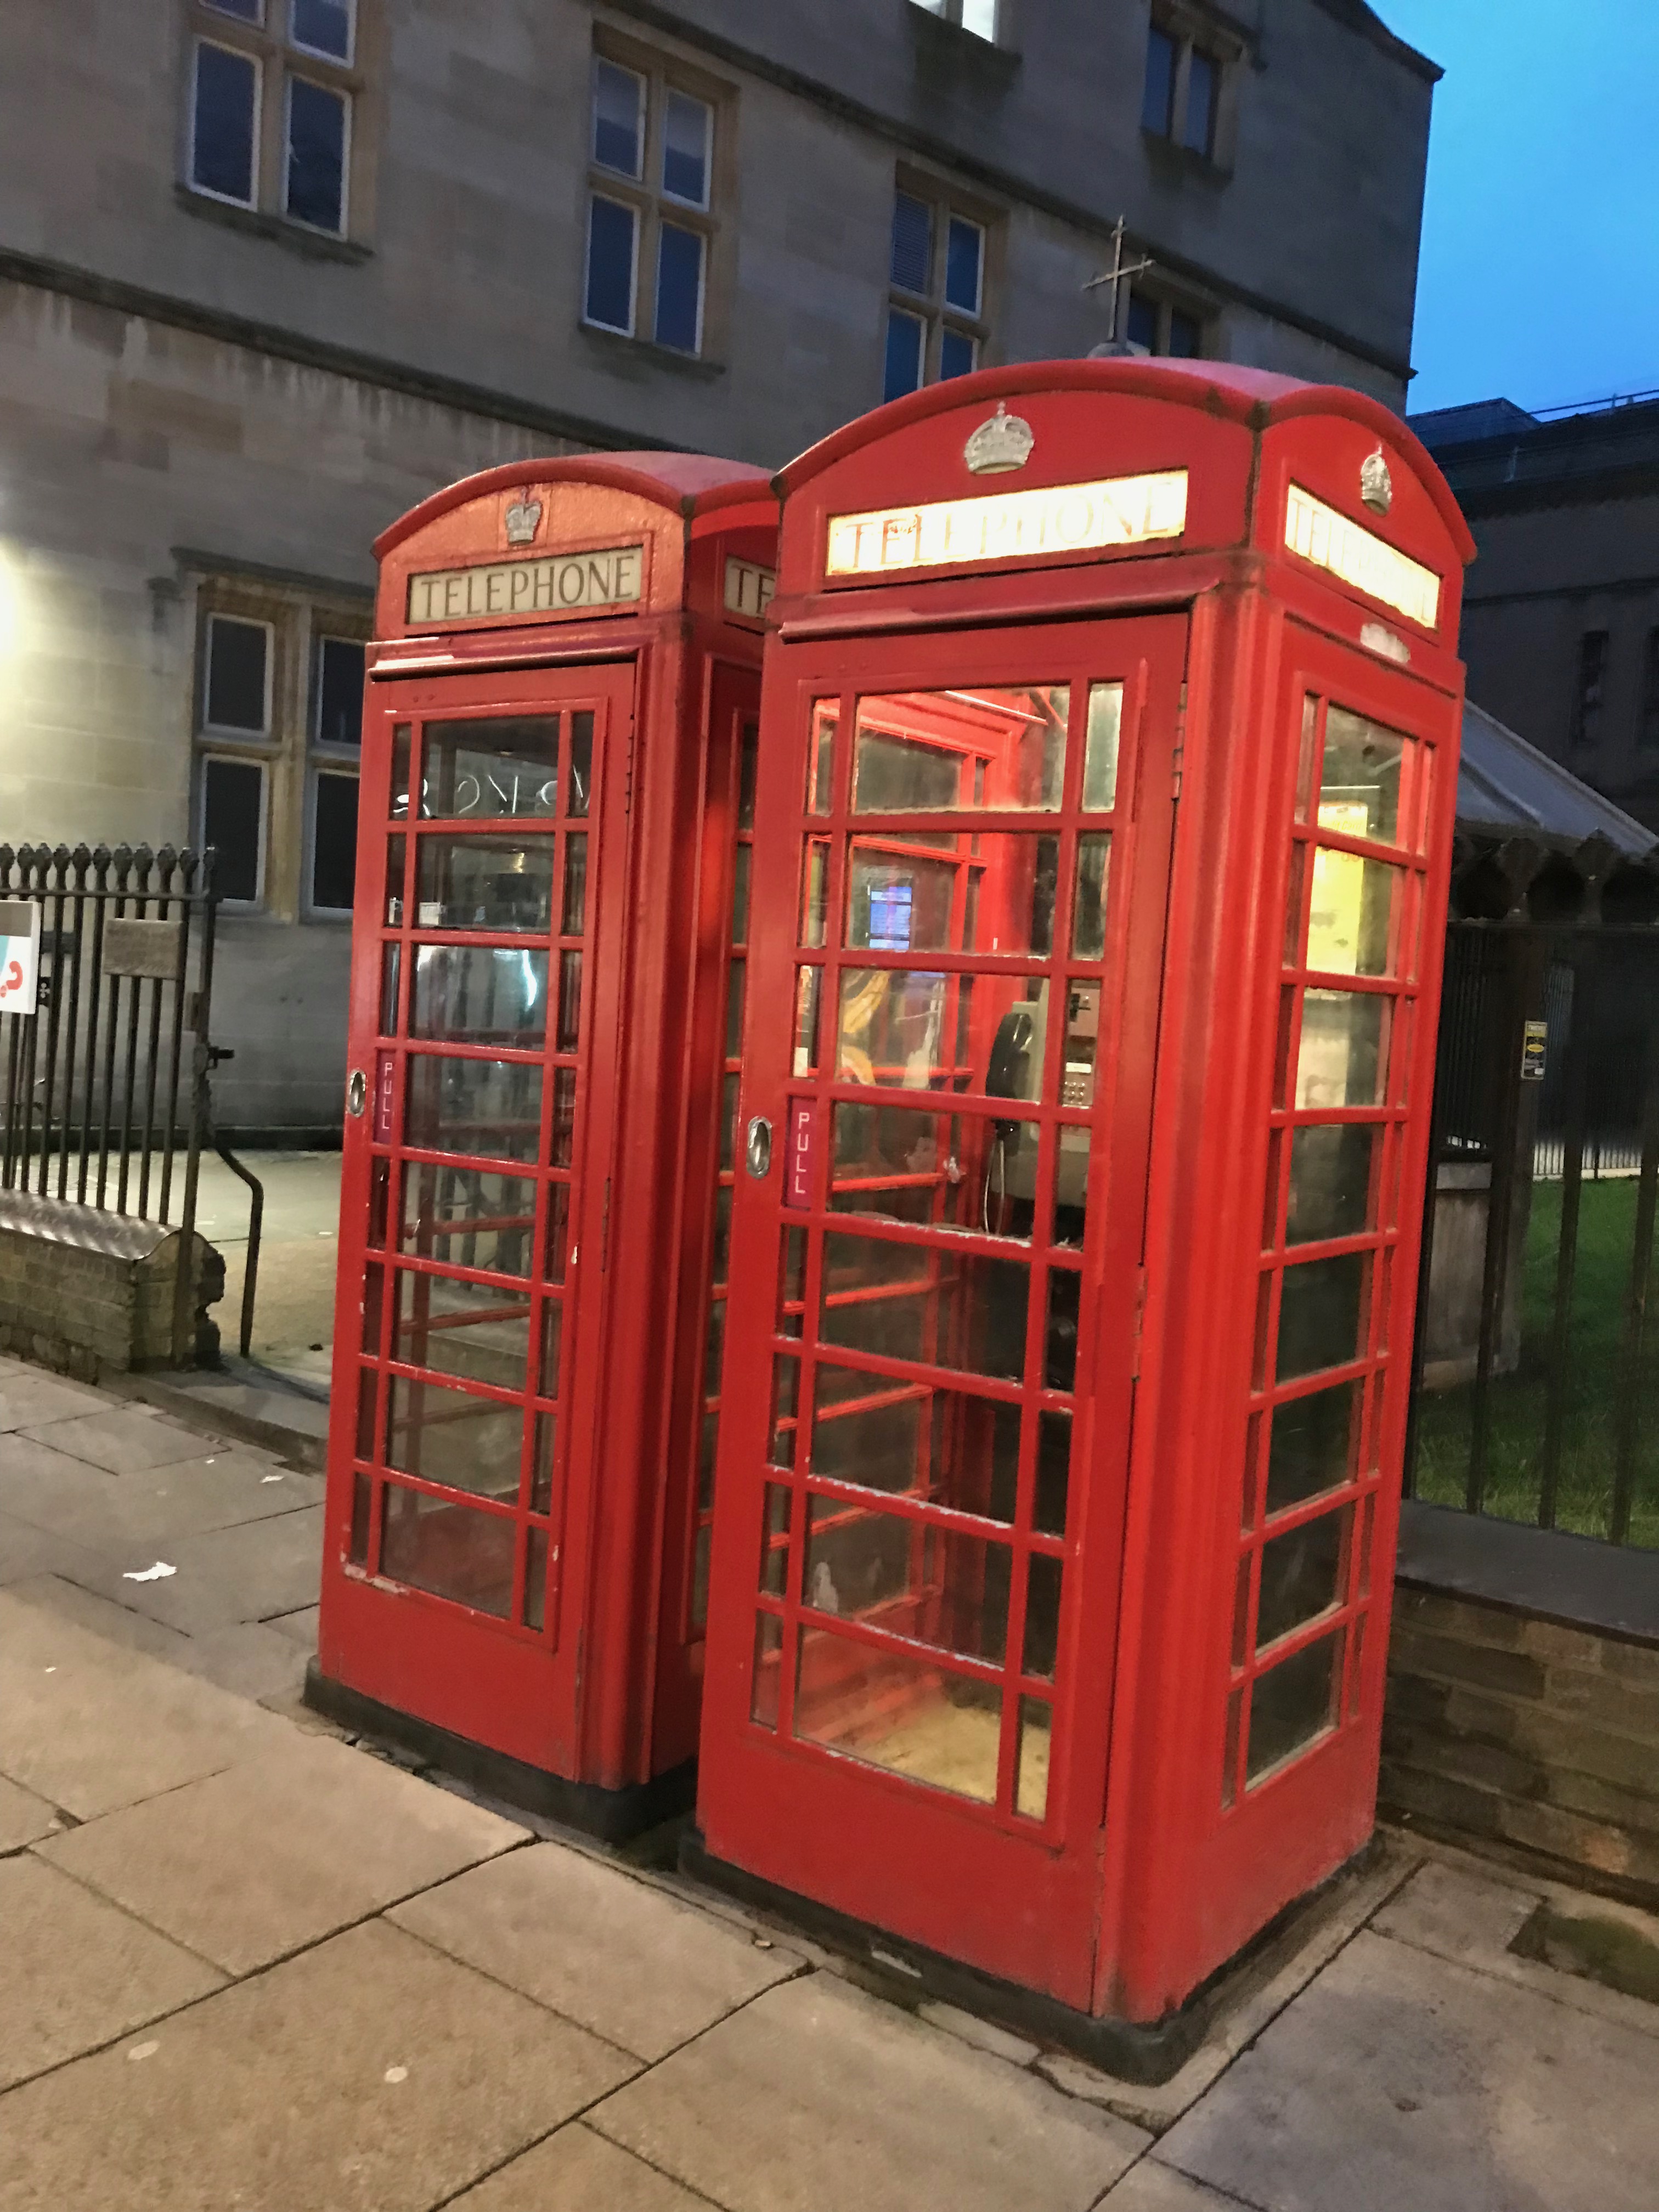 Can't have a visit to Britain without seeing these phone booths